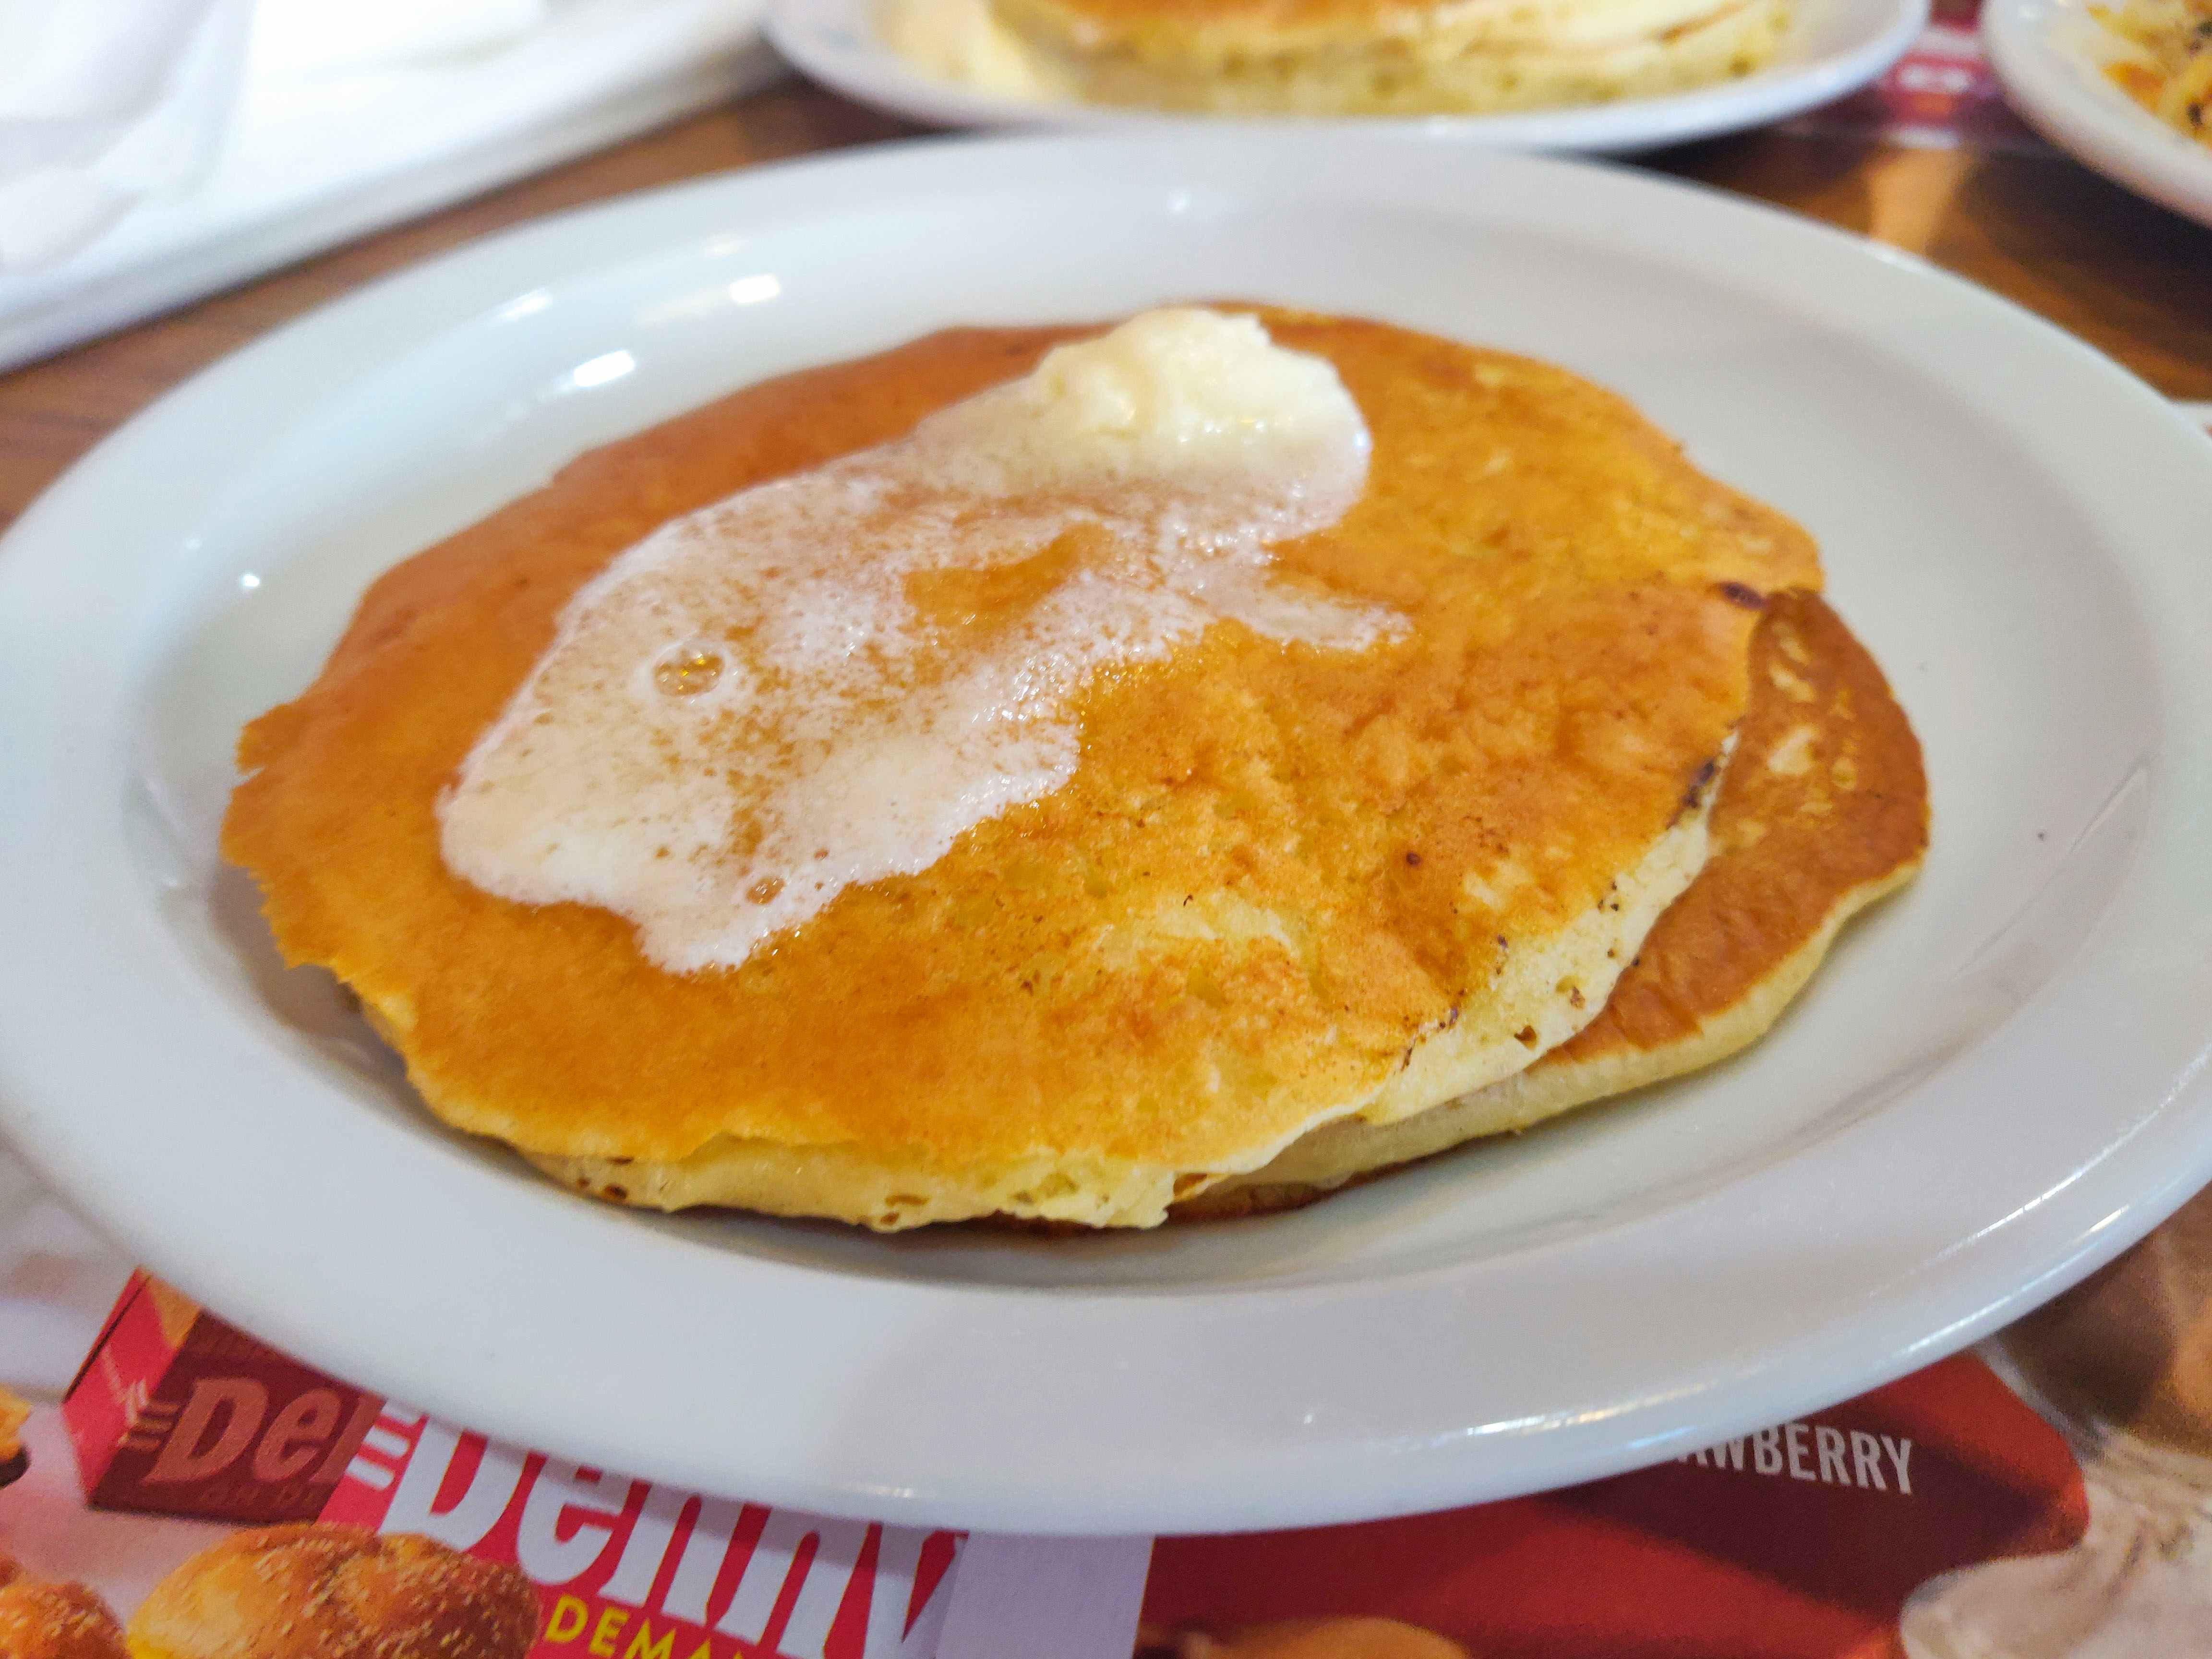 You Can Get All-You-Can-Eat Pancakes for $5 at IHOP This Month